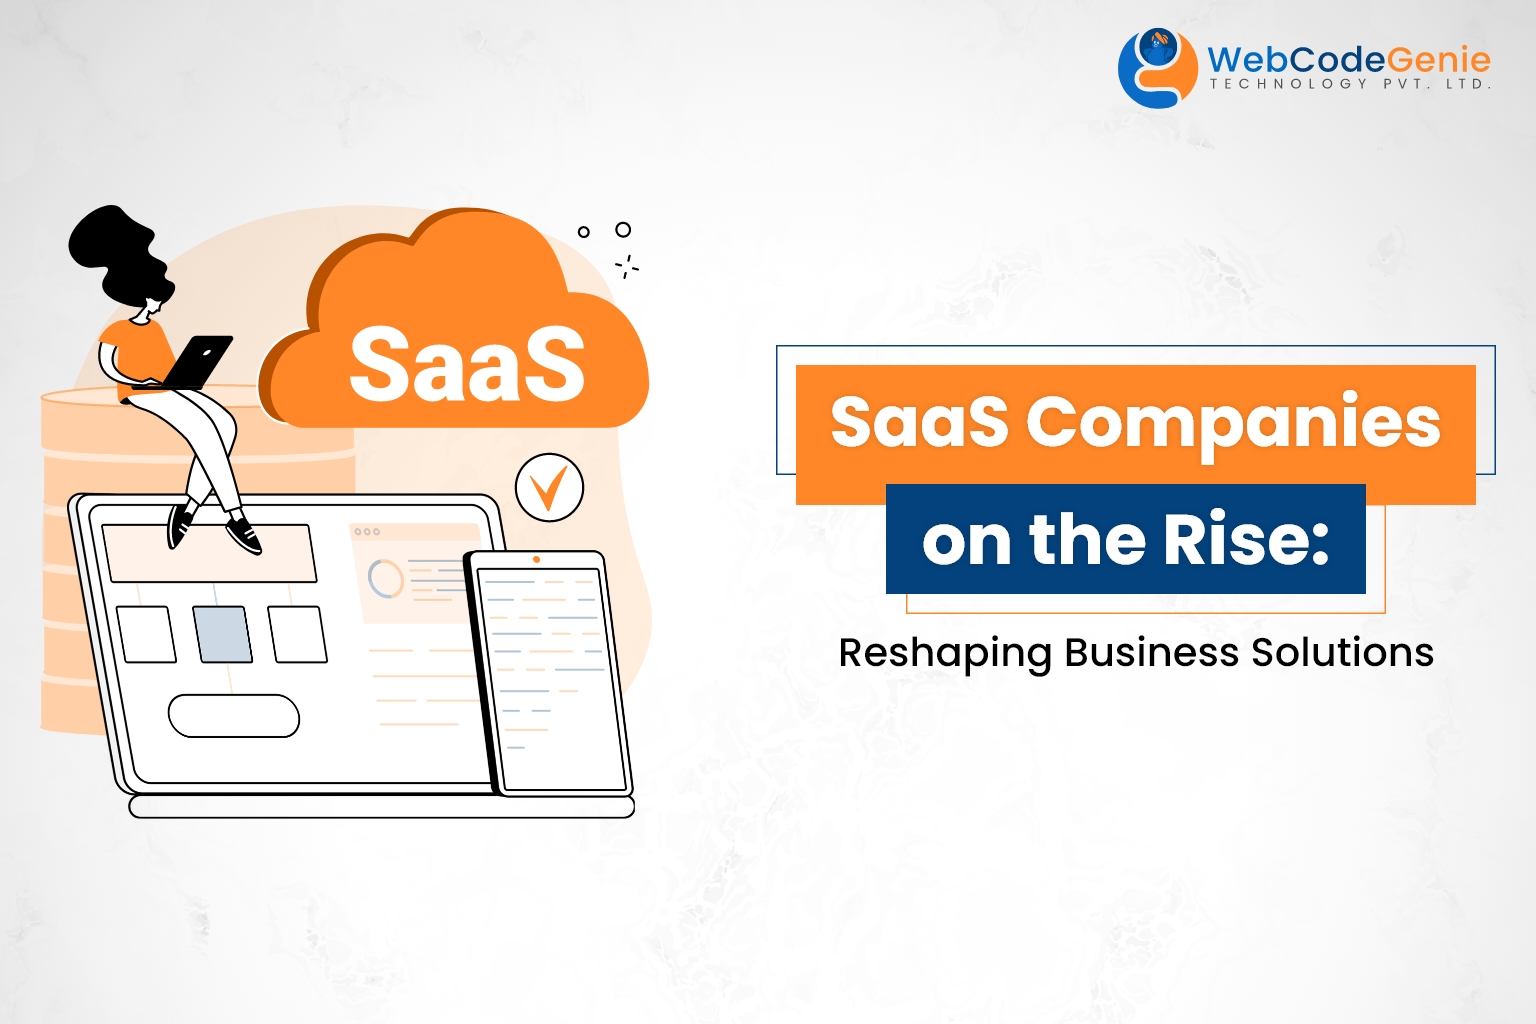 SaaS Companies on the Rise Reshaping Business Solutions